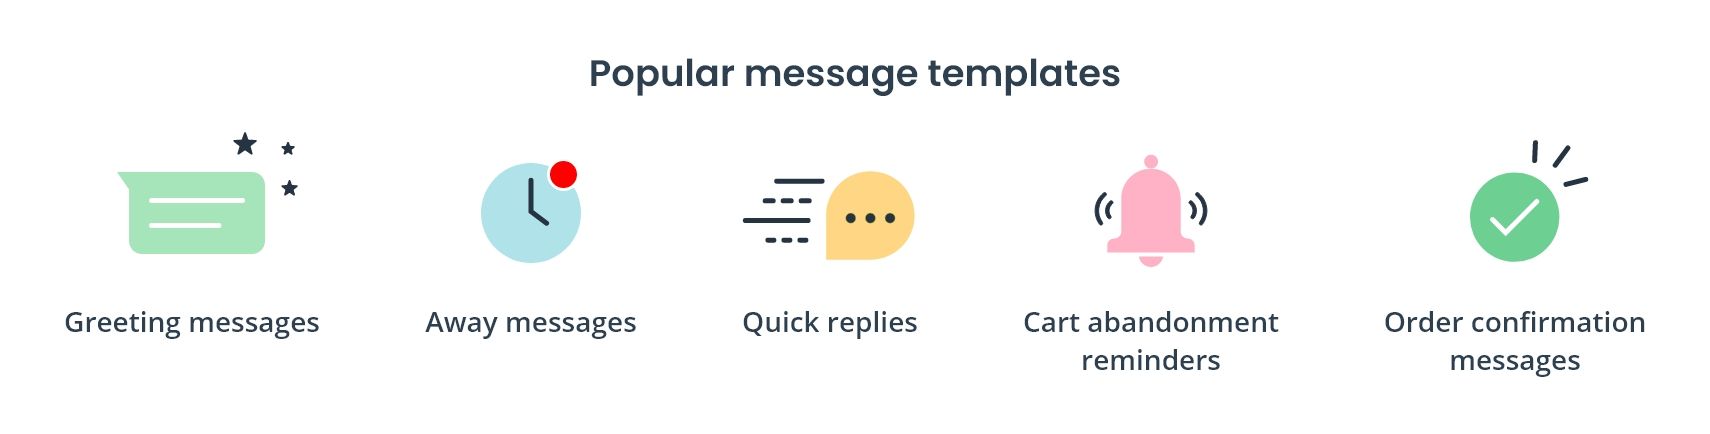 Popular types of message templates